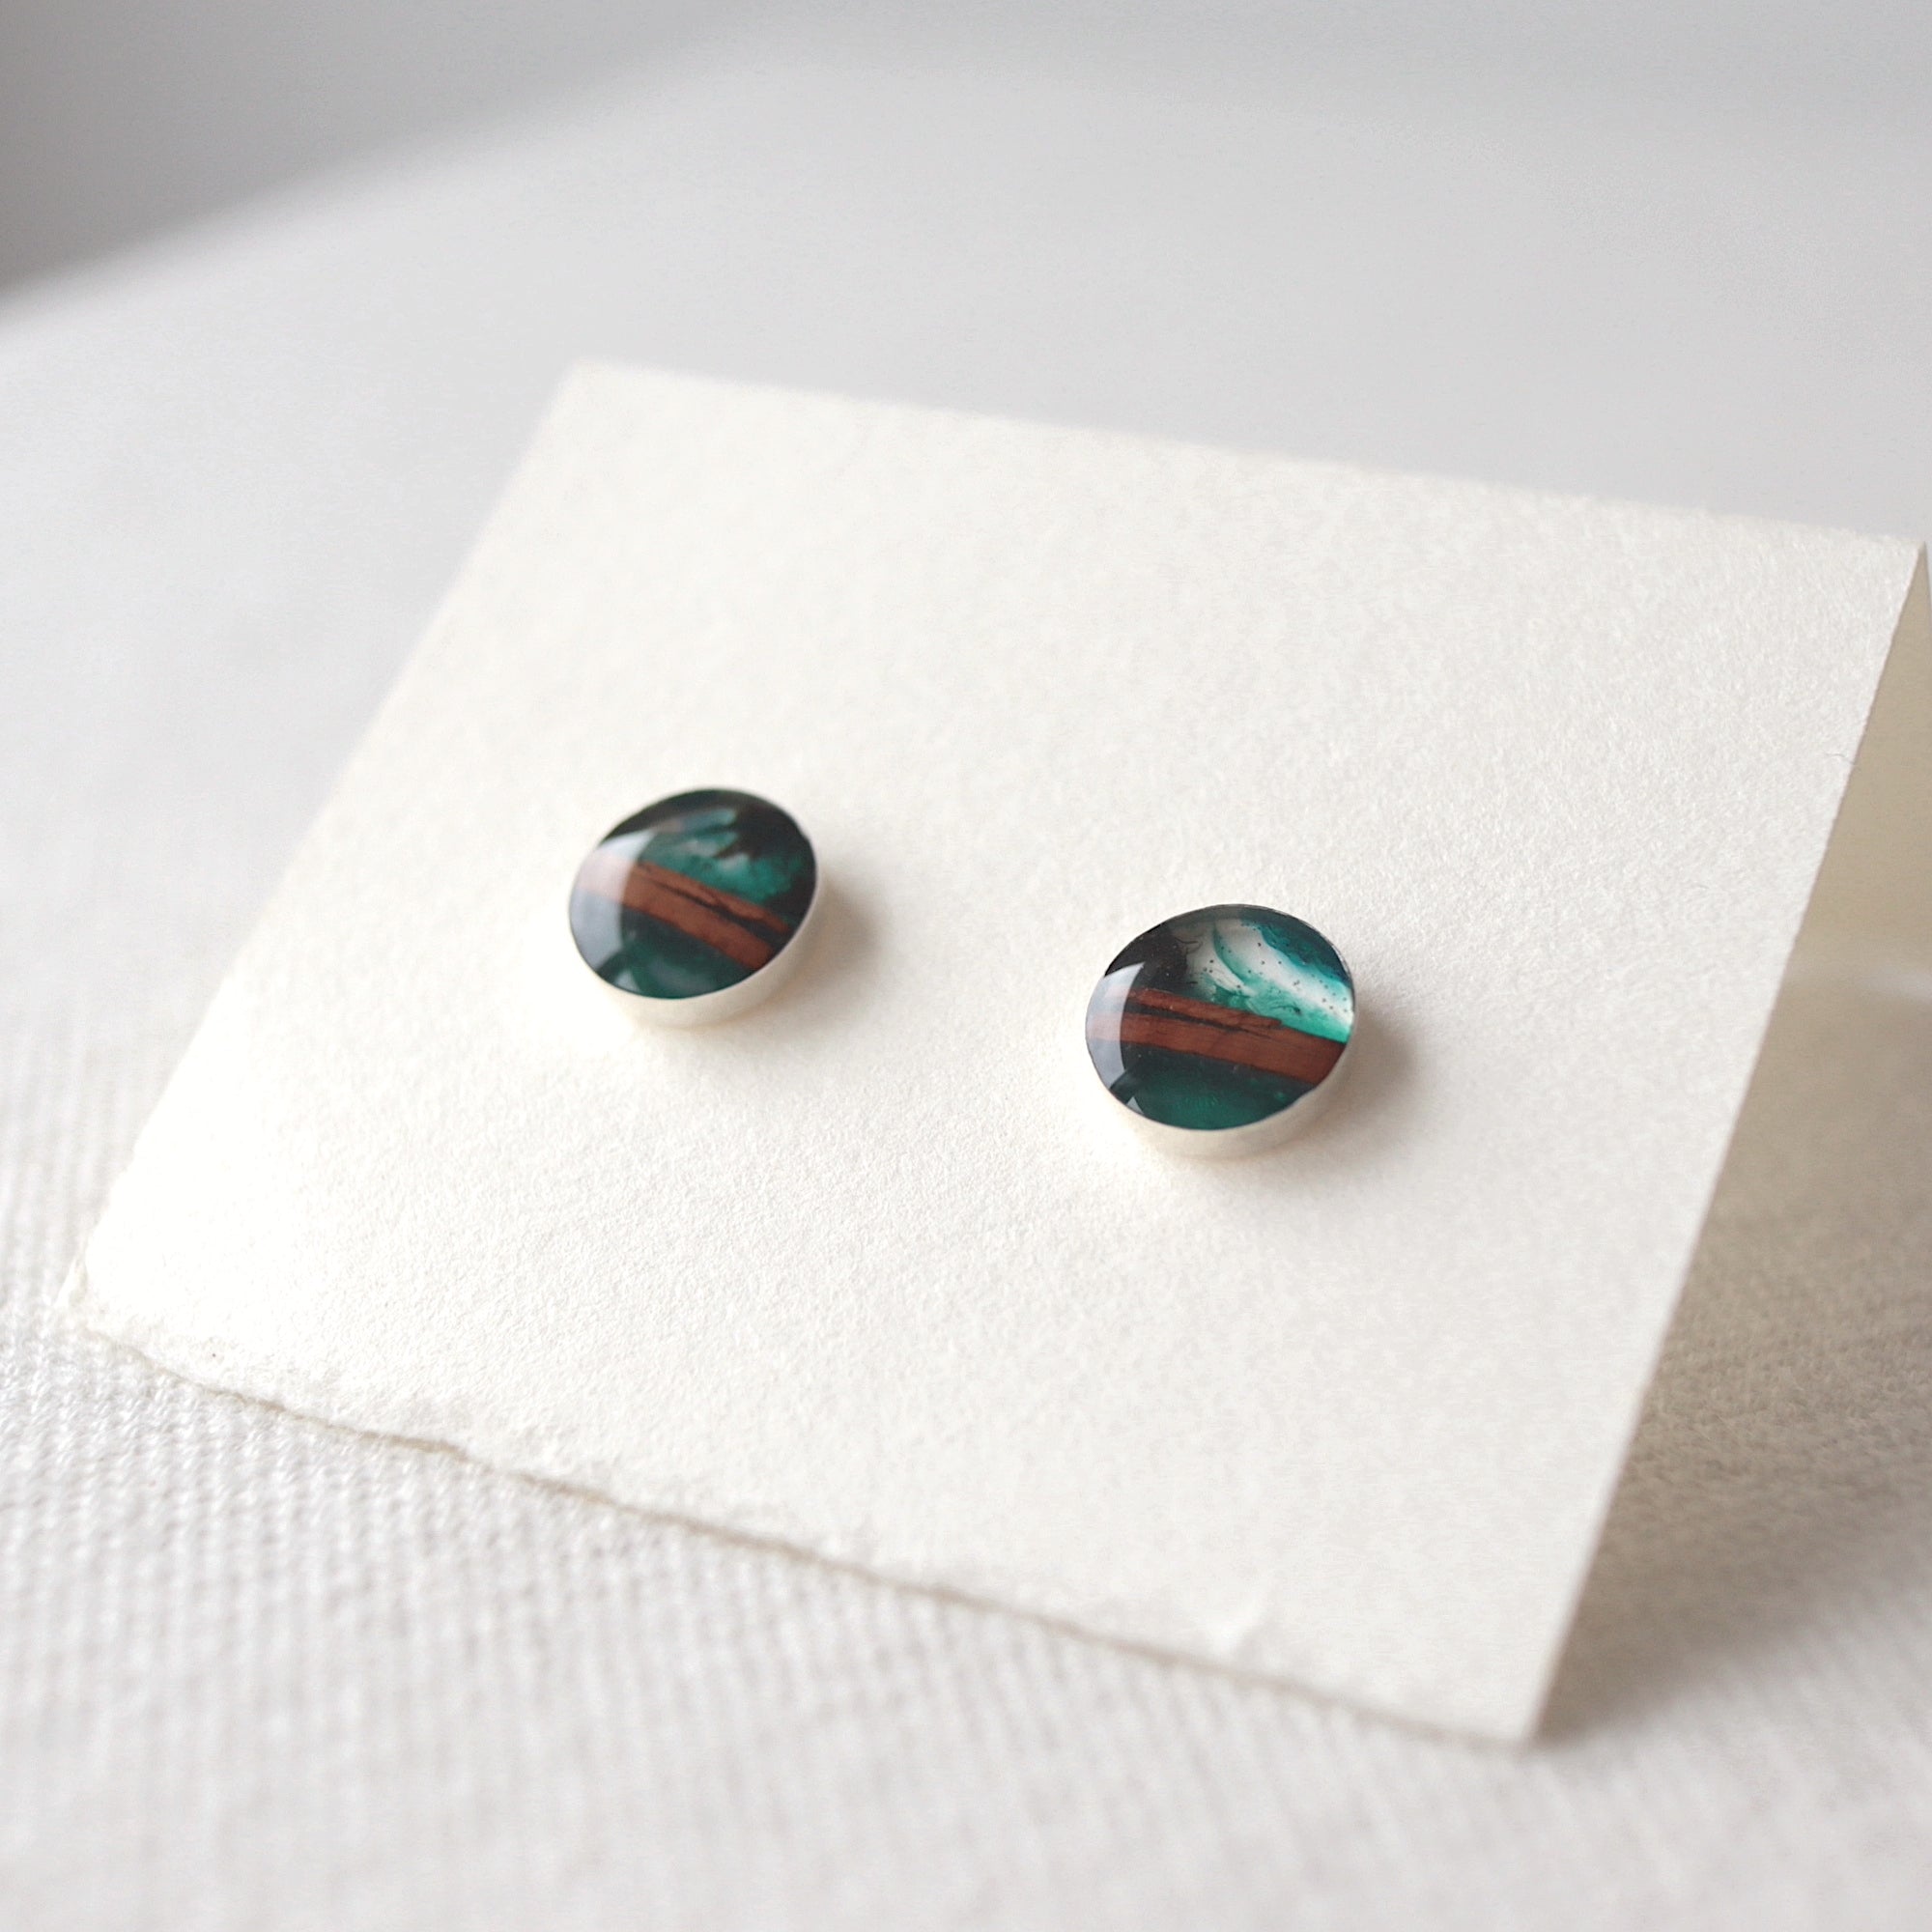 birch bark studs with sterling silver cups and blue resin by Wild Blue Yonder